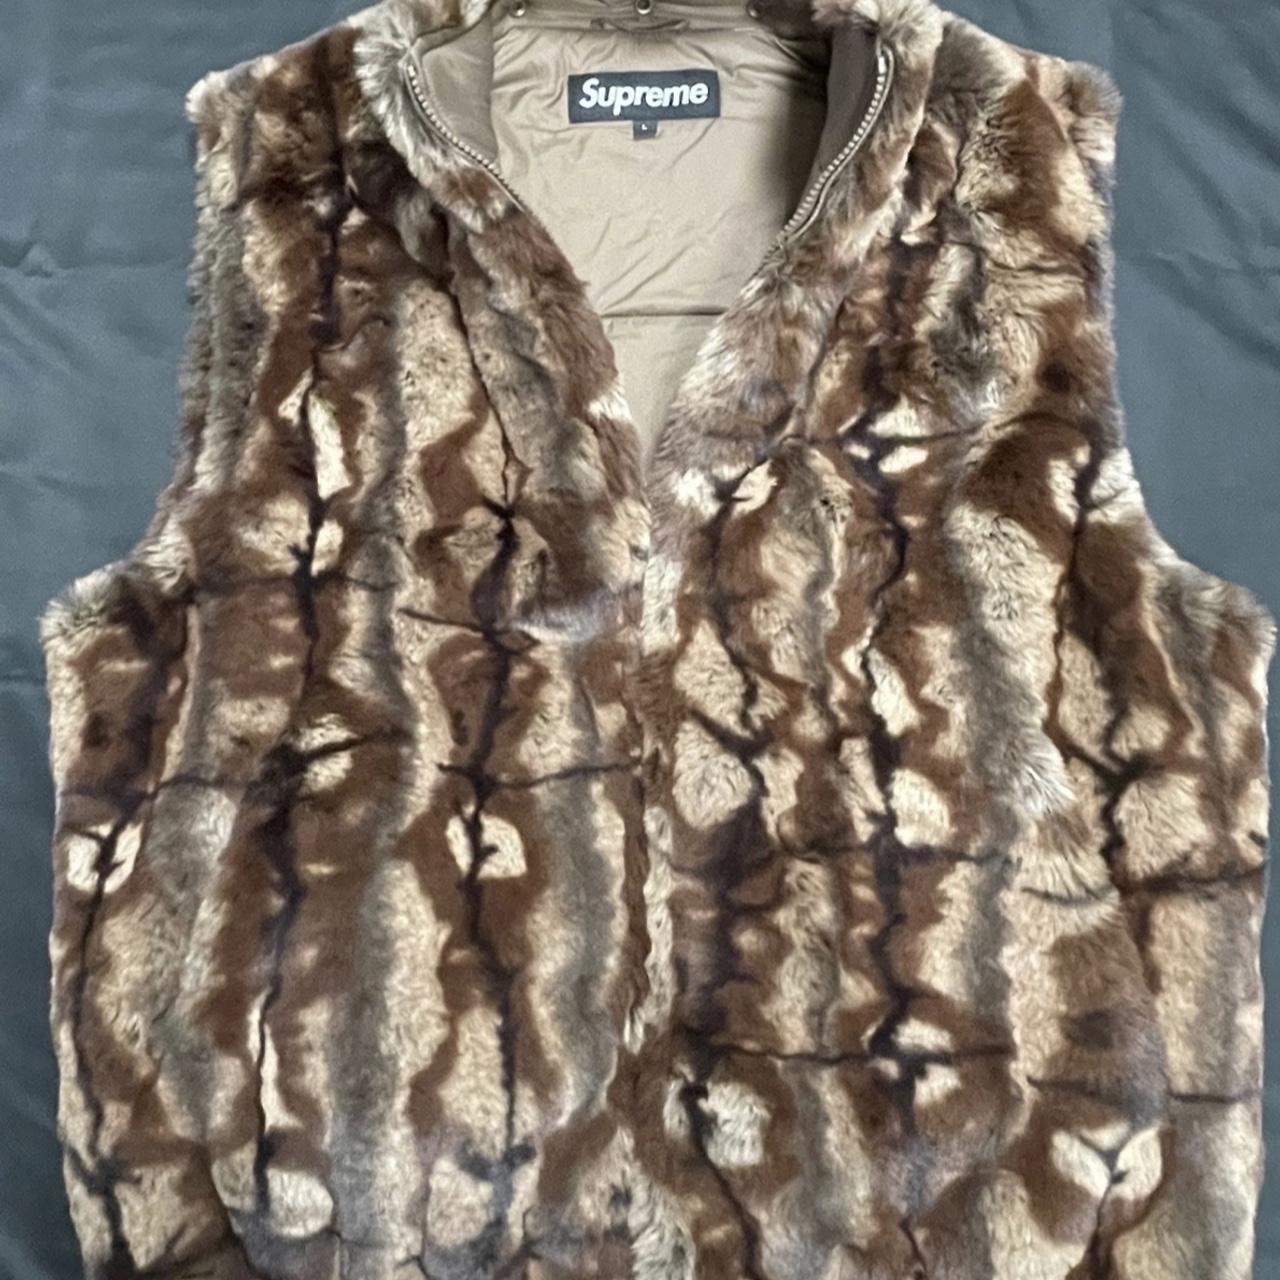 Supreme Faux Fur Hooded Vest size Large, New and